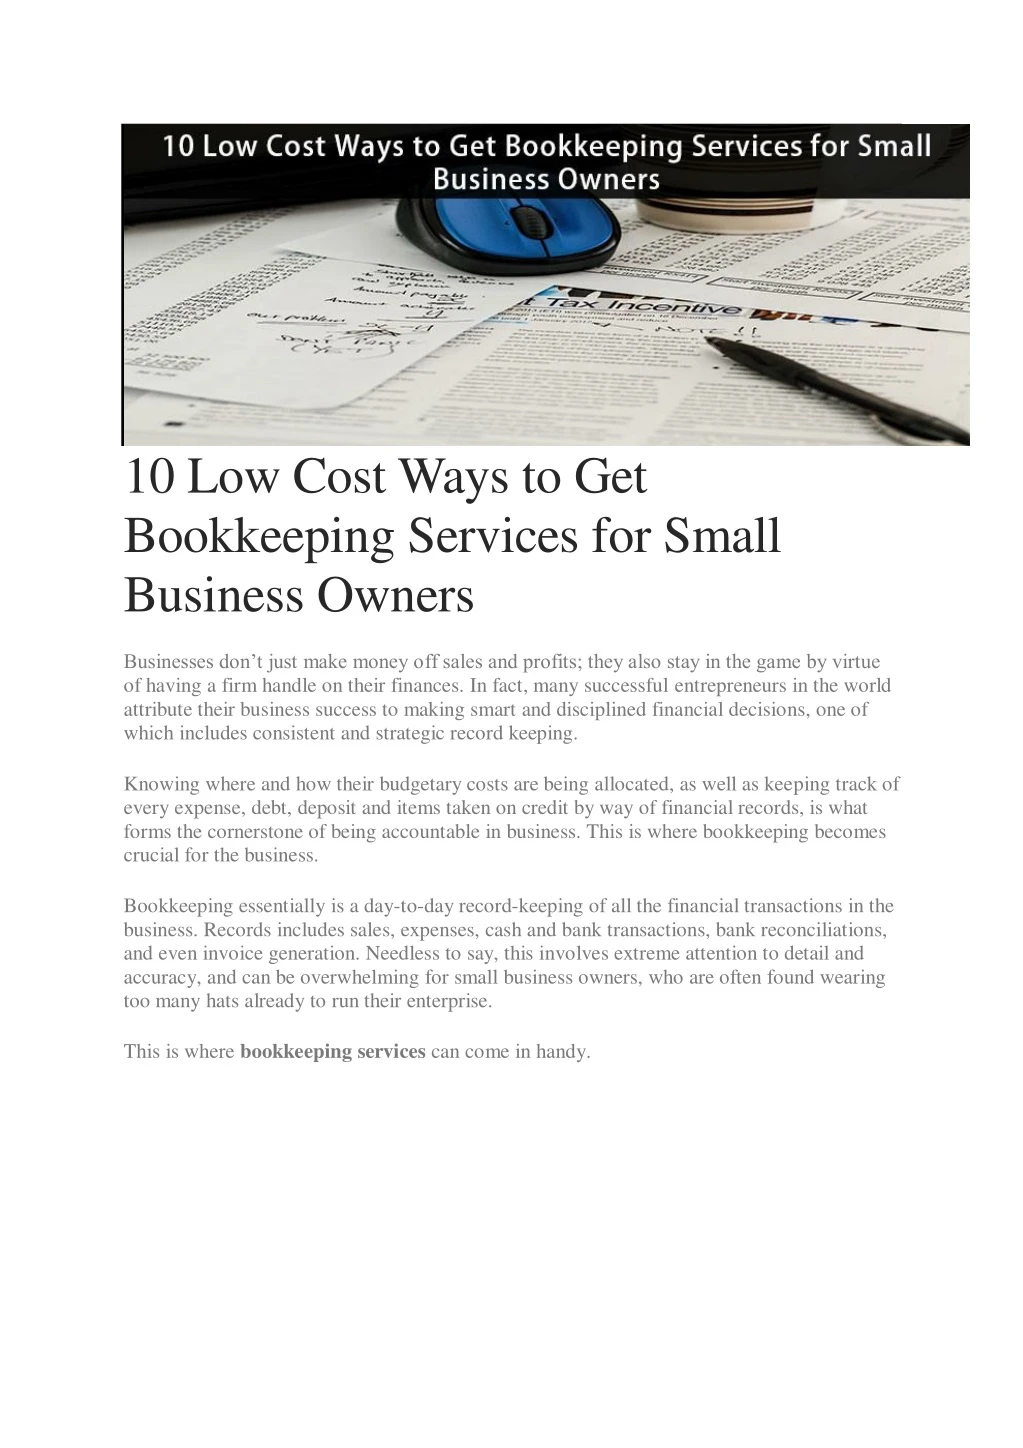 10 low cost ways to get bookkeeping services